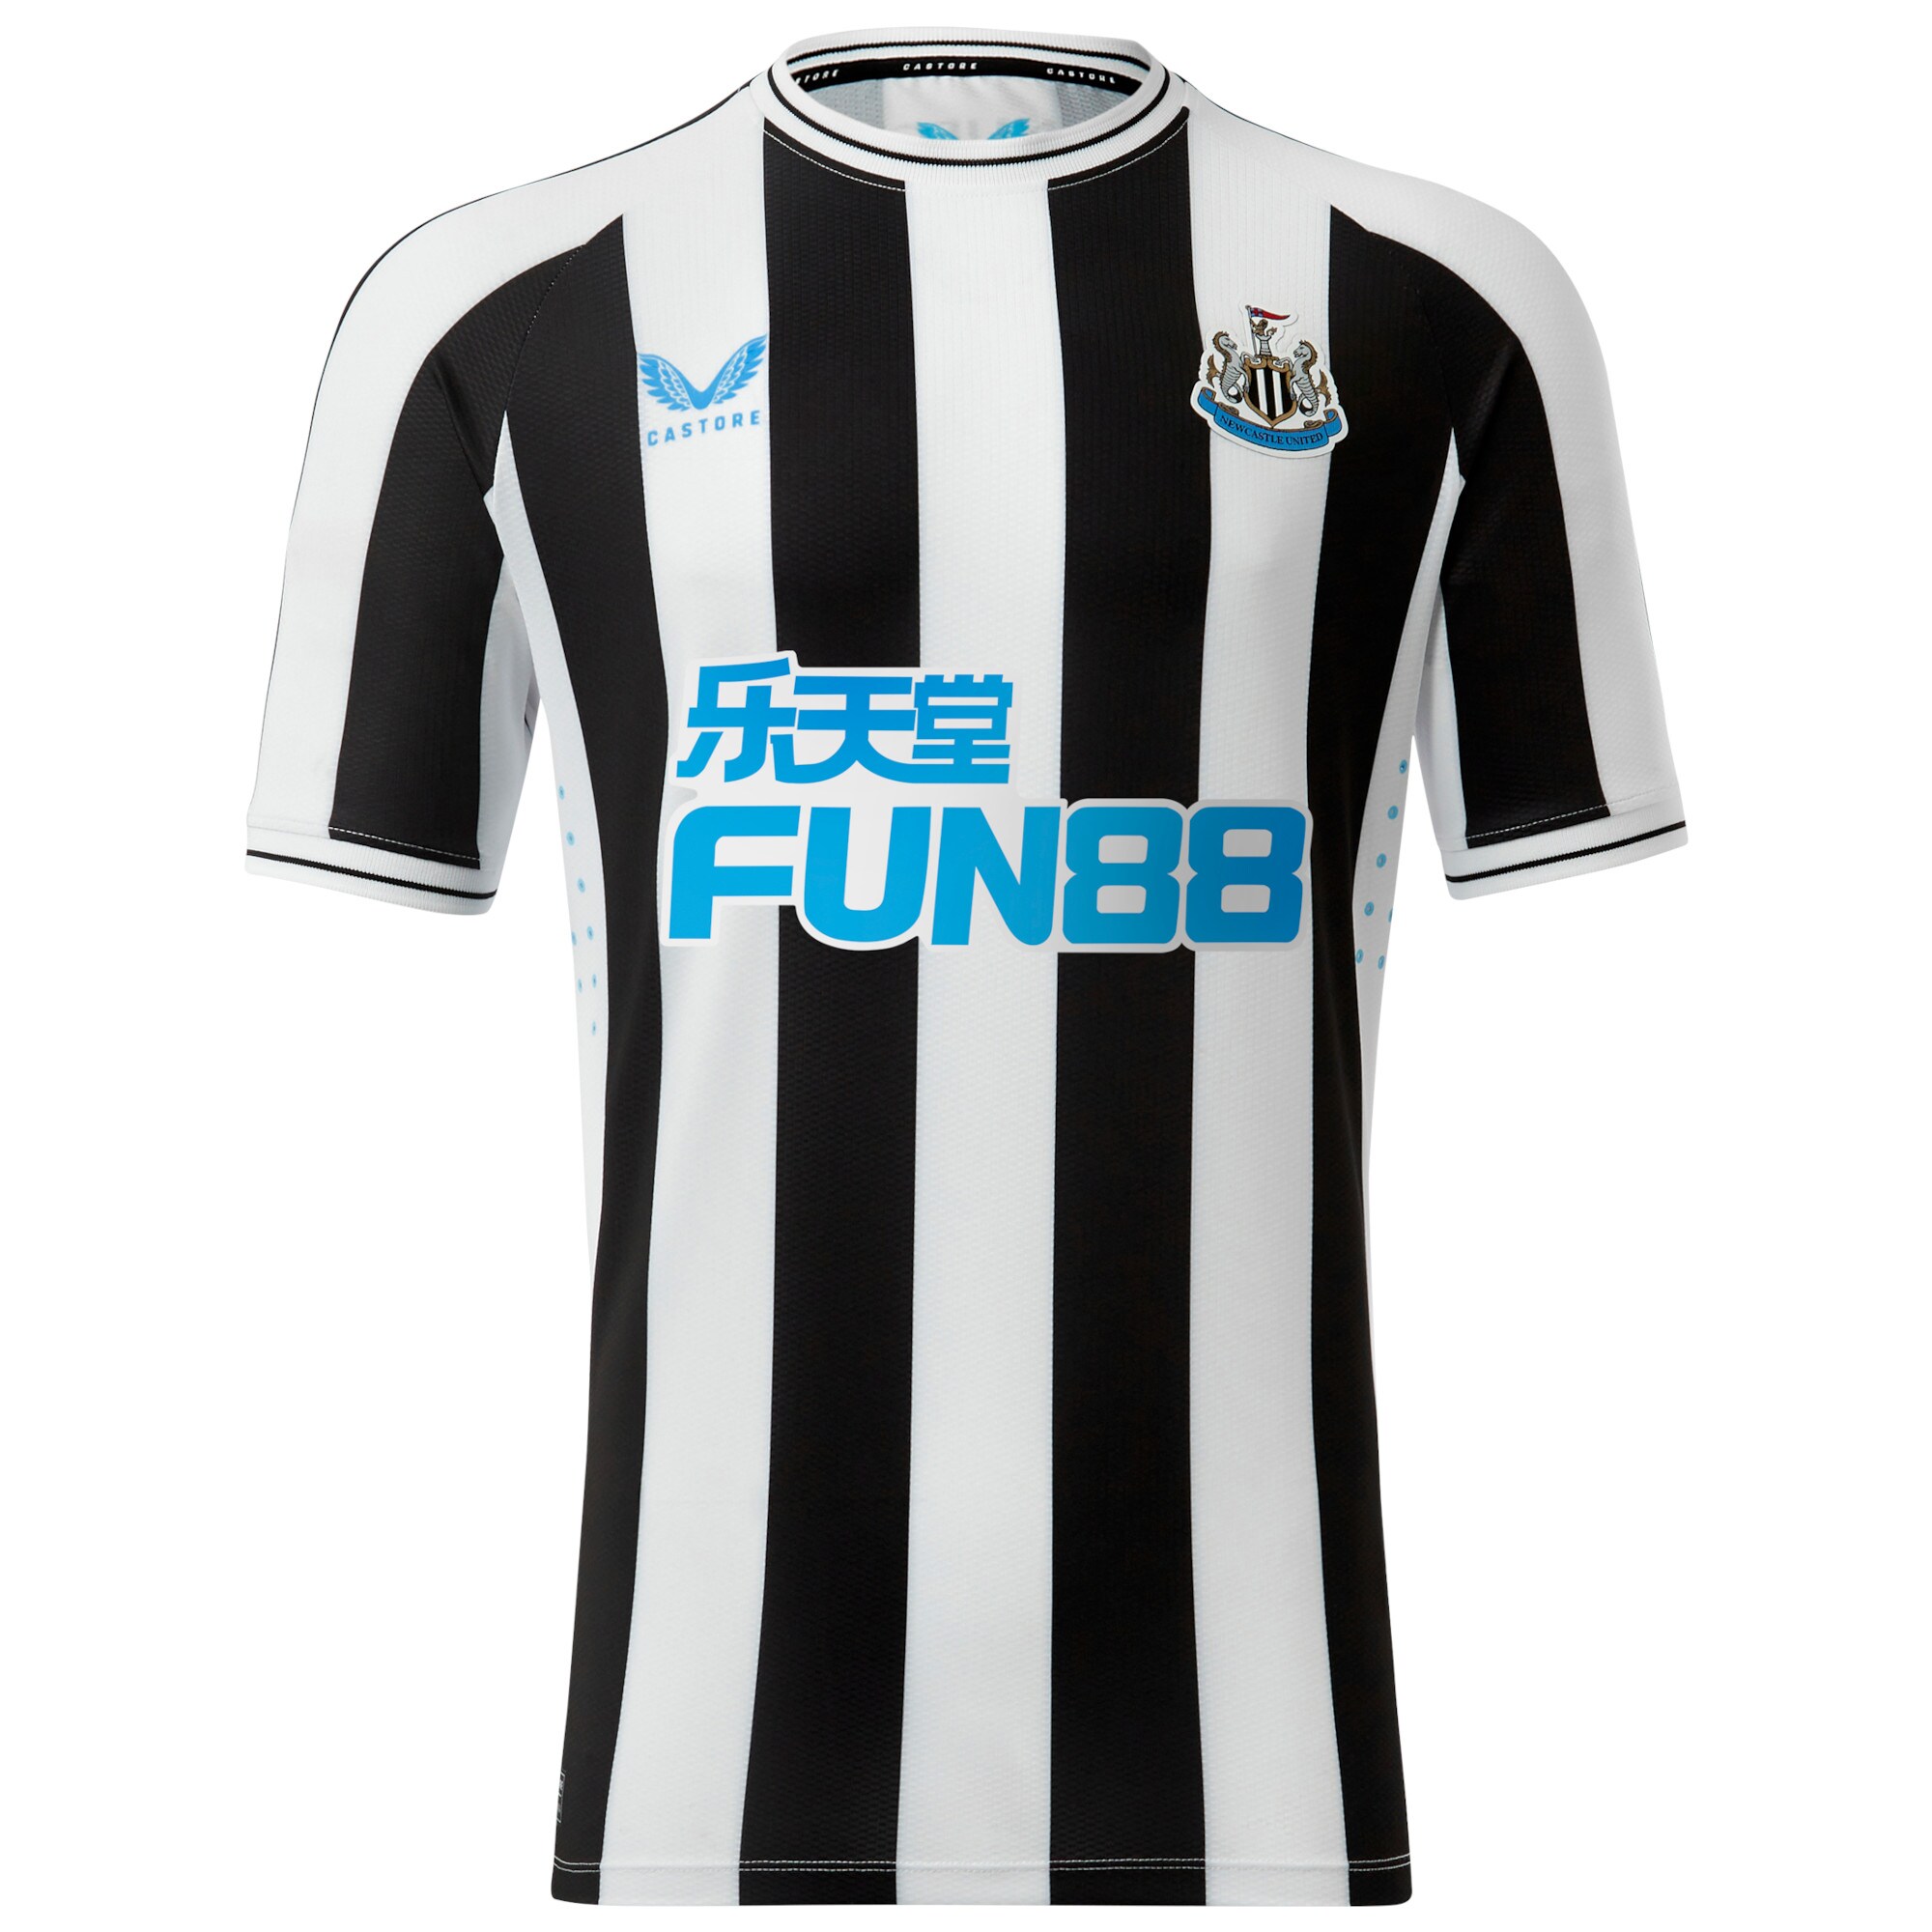 Newcastle United Home Pro Shirt 2022-23 with Almirón 24 printing